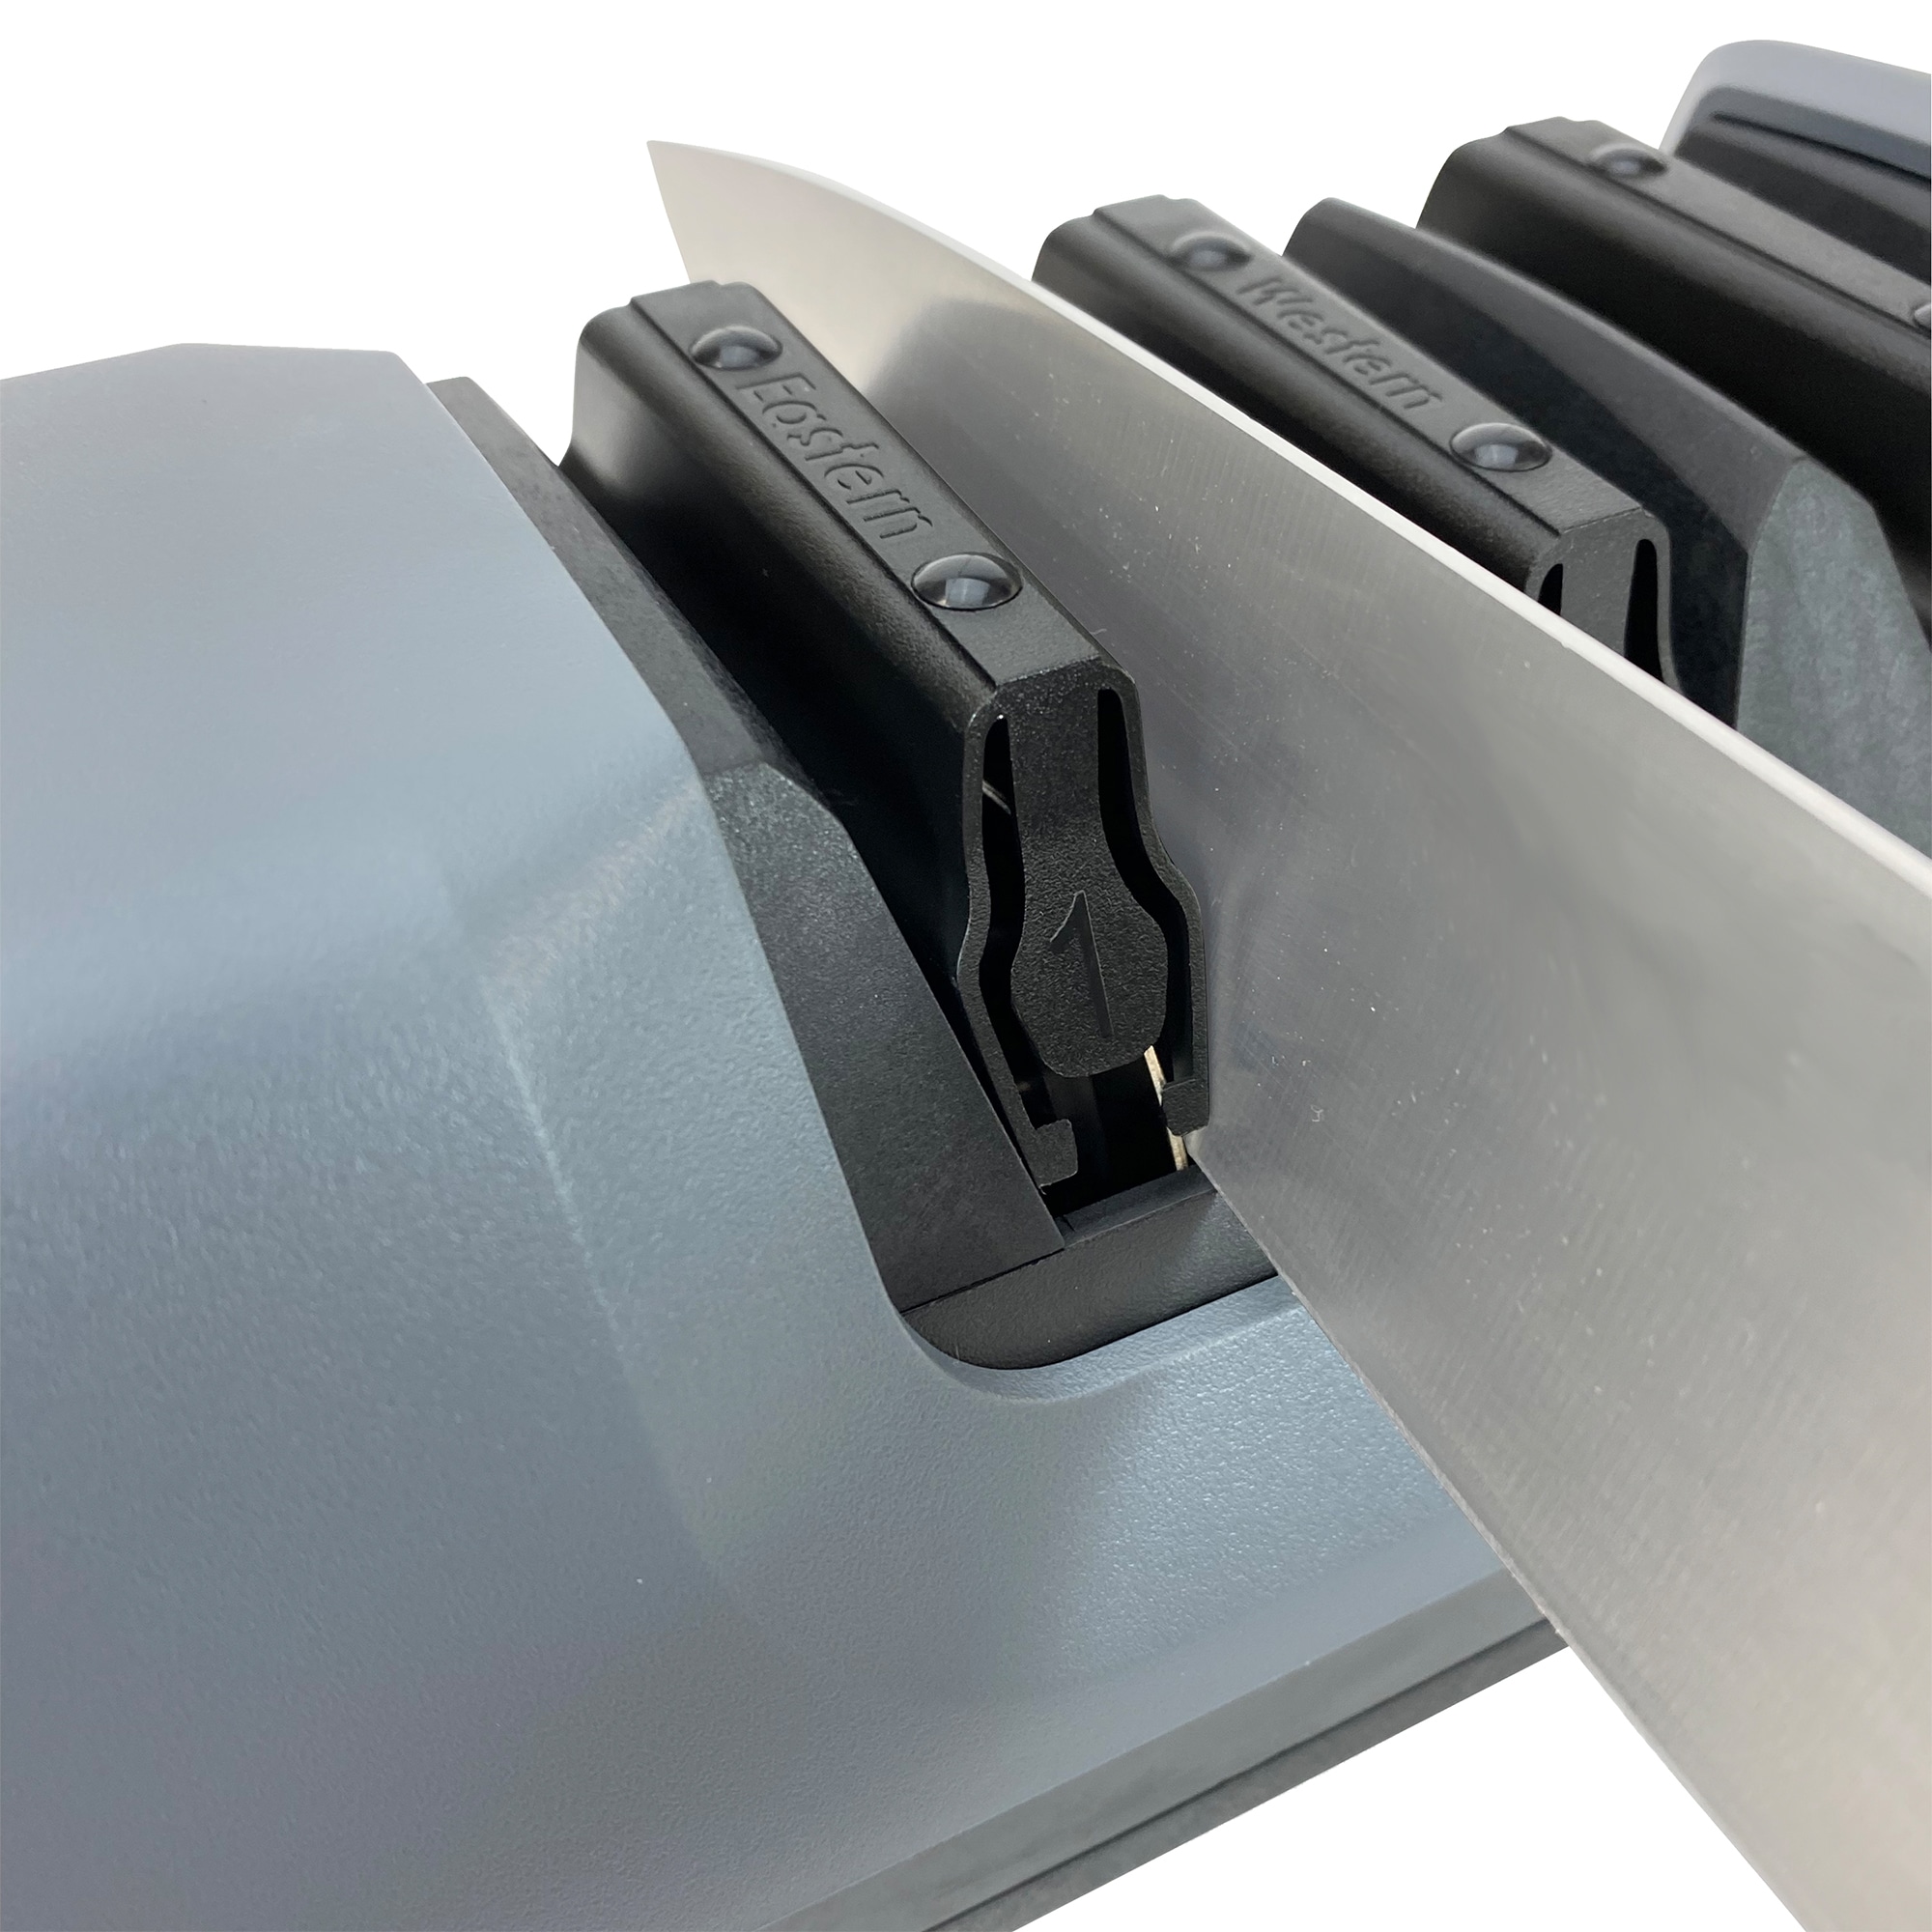  EdgeCraft E120 Electric Knife Sharpeners for 20-Degree